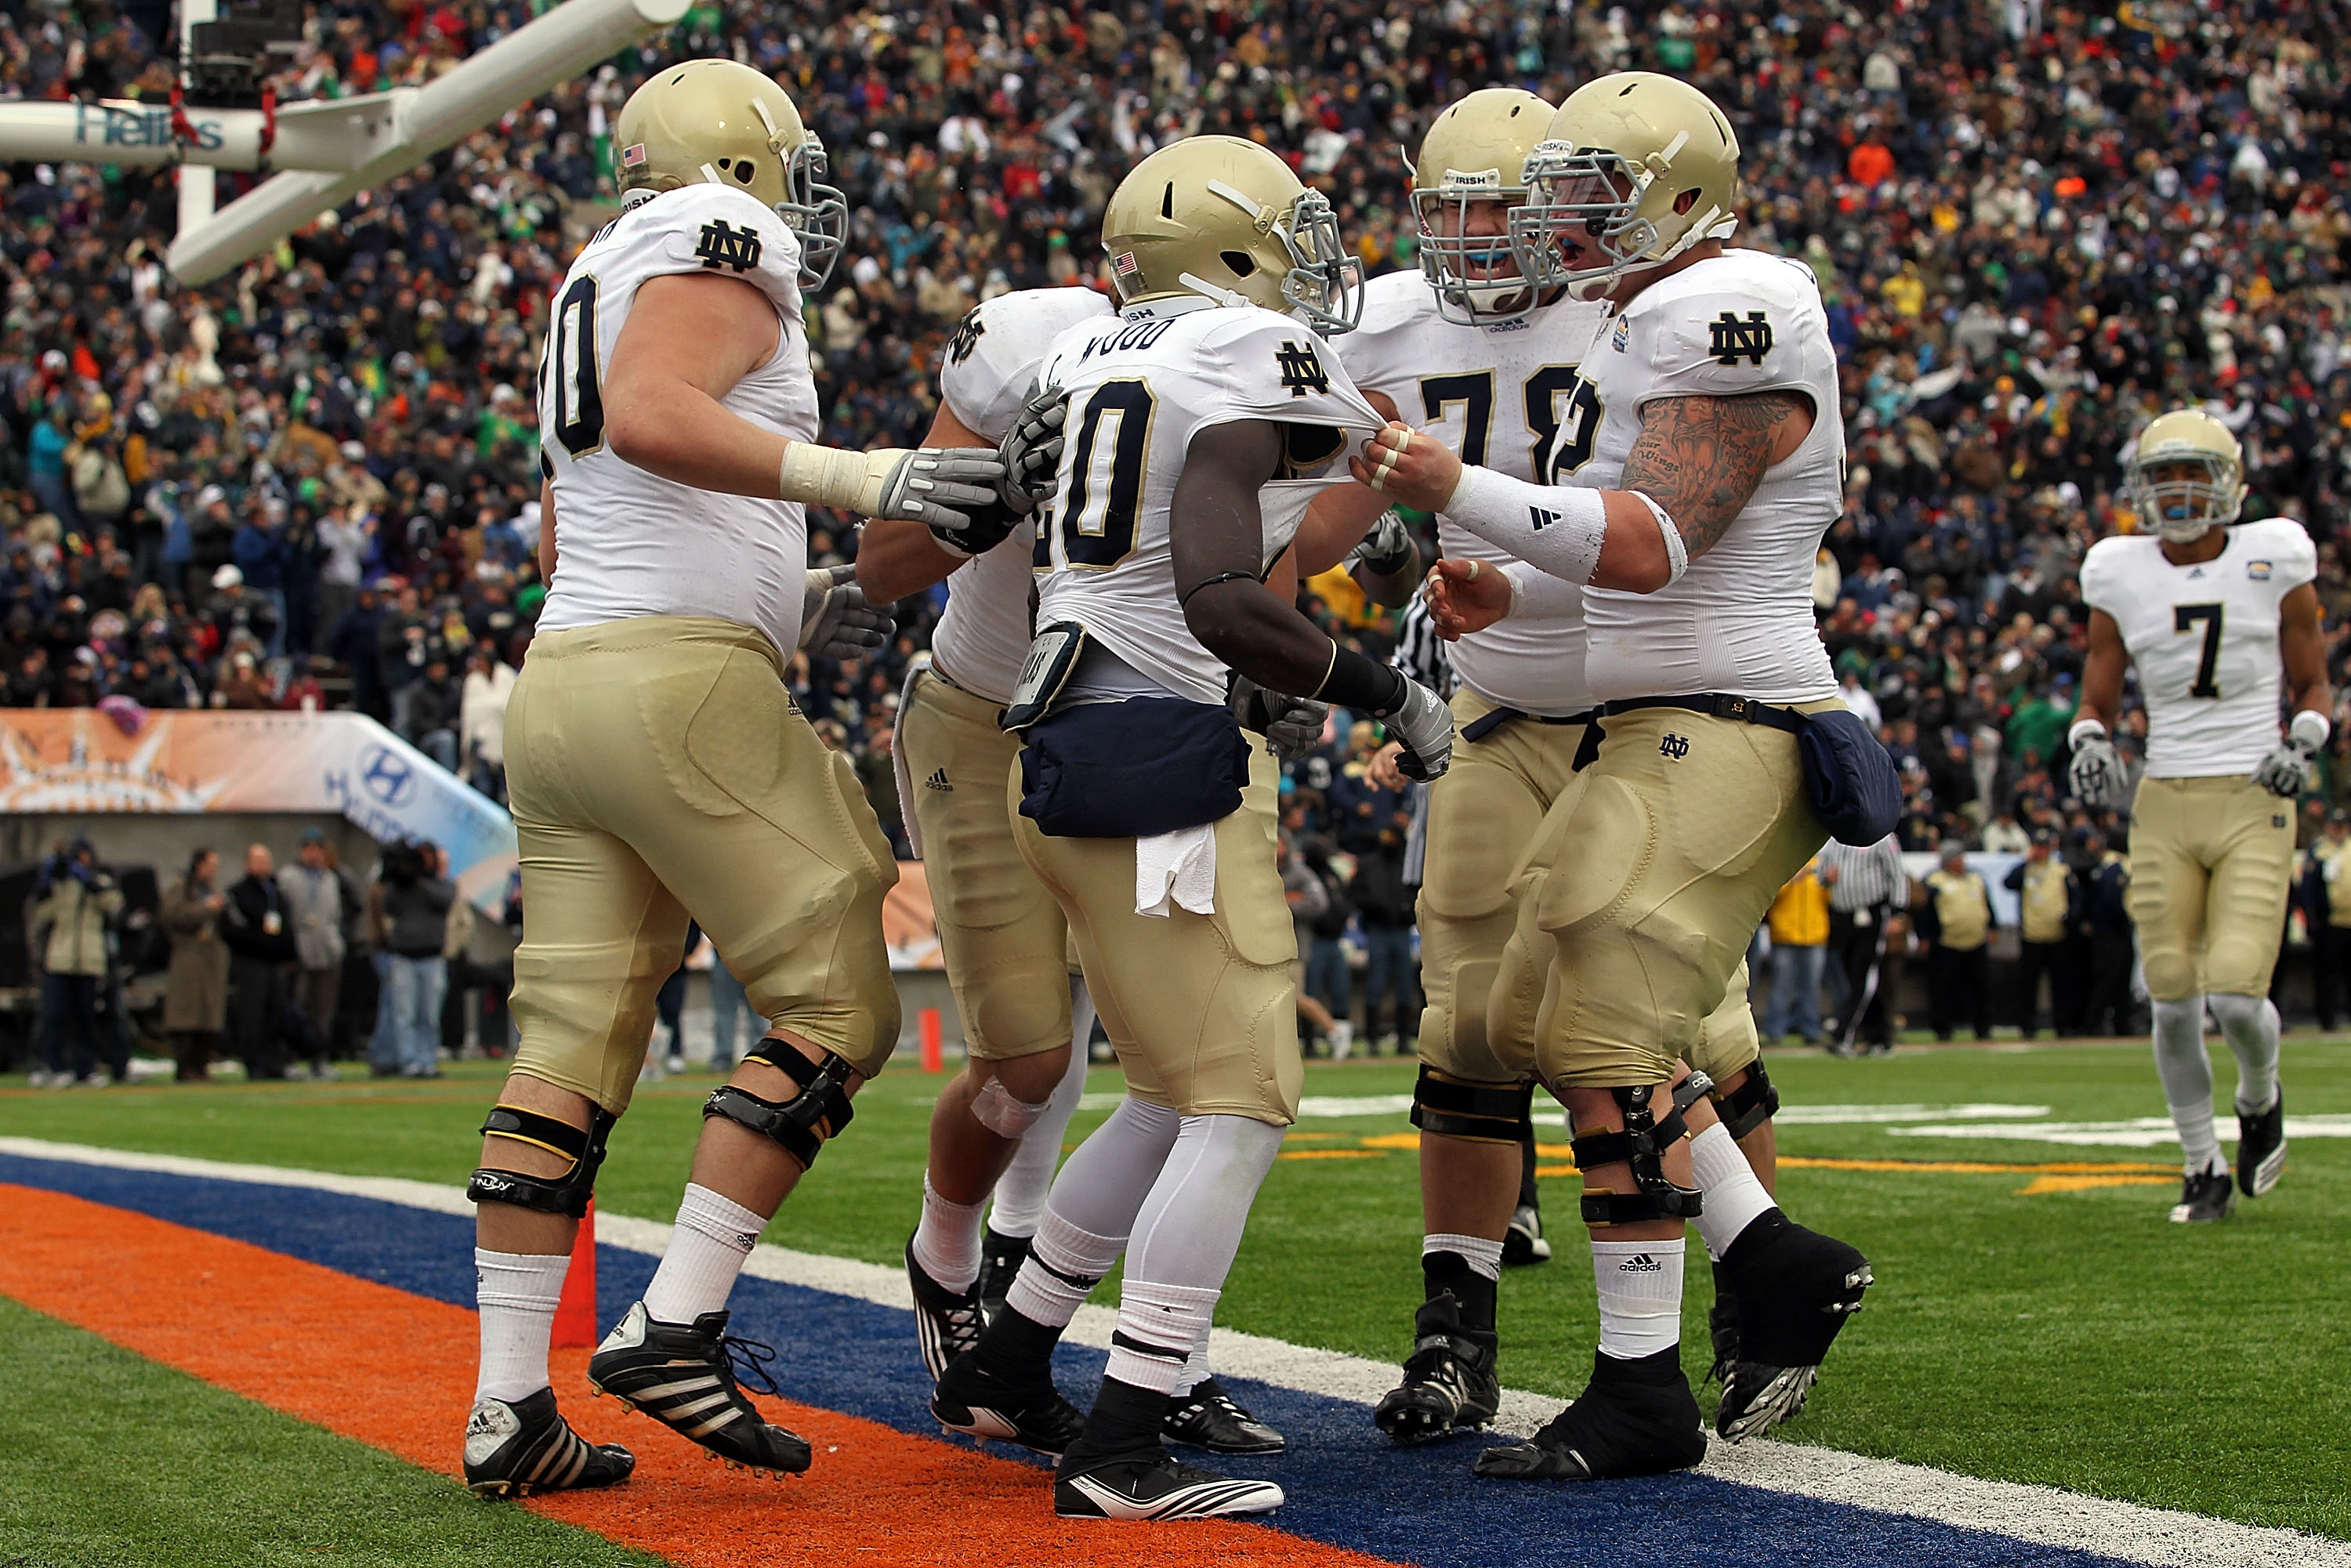 EL PASO, TX - DECEMBER 30:  Running back Cierre Wood #20 of the Notre Dame Fighting Irish celebrates a touchdown against the Miami Hurricanes during the Hyundai Sun Bowl at Sun Bowl on December 30, 2010 in El Paso, Texas.  (Photo by Ronald Martinez/Getty